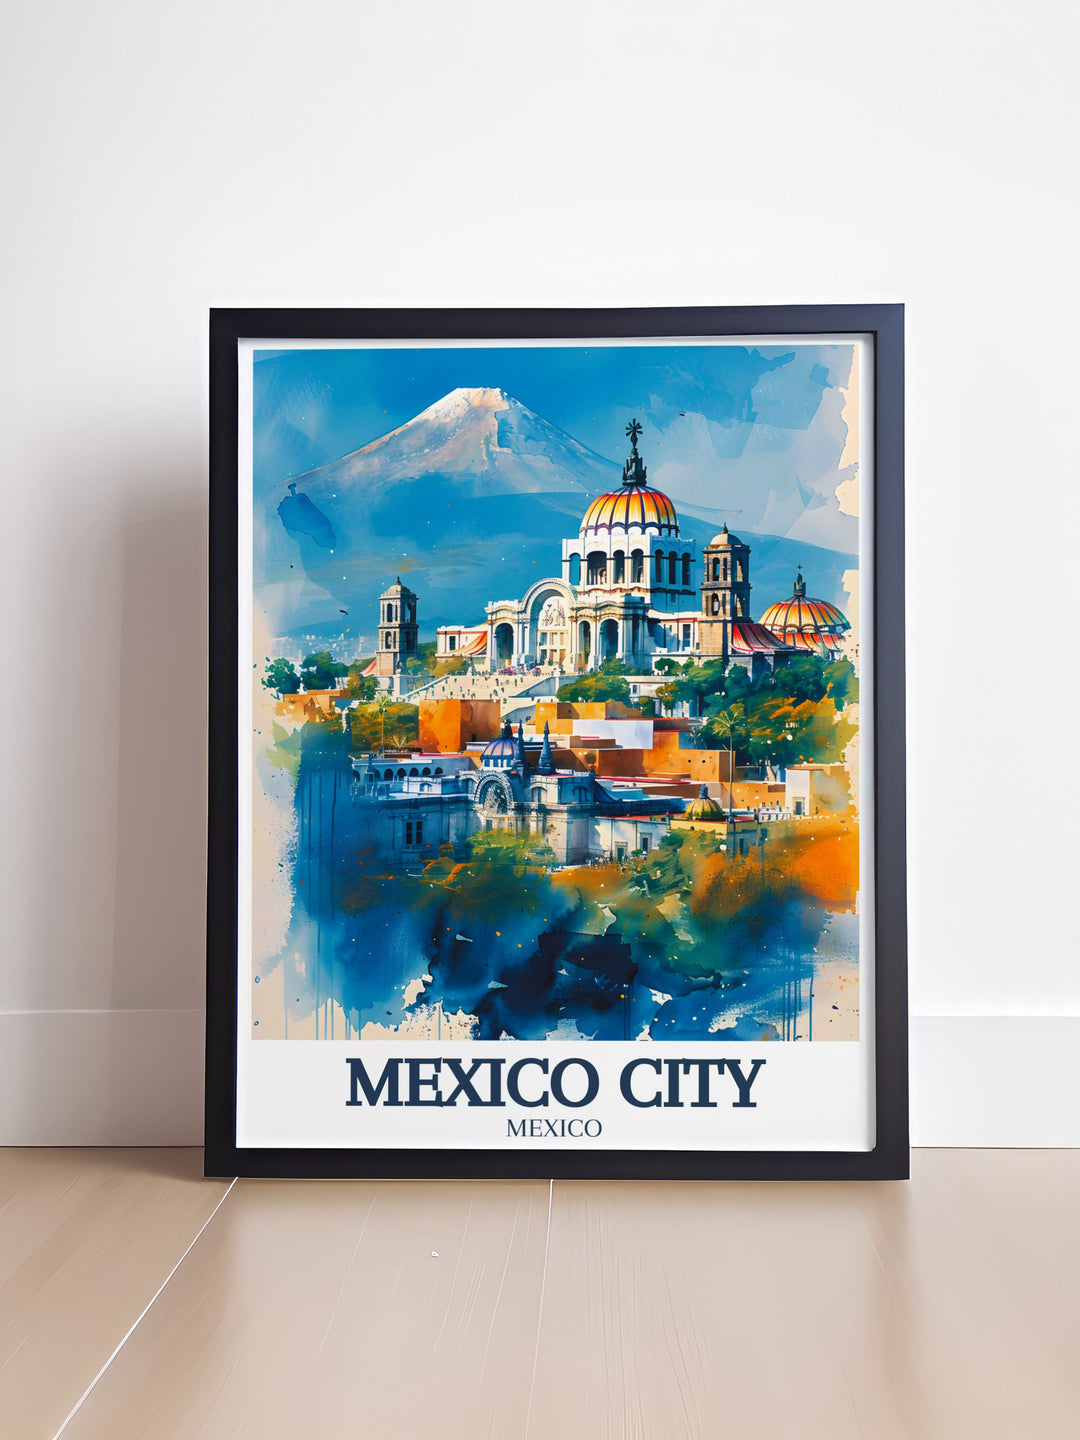 Beautiful Metropolitan cathedral Zocalo Chapultepec castle vintage print capturing the essence of Mexico City. This artwork highlights the architectural splendor and historical significance of these landmarks. A unique addition to any home or office decor.